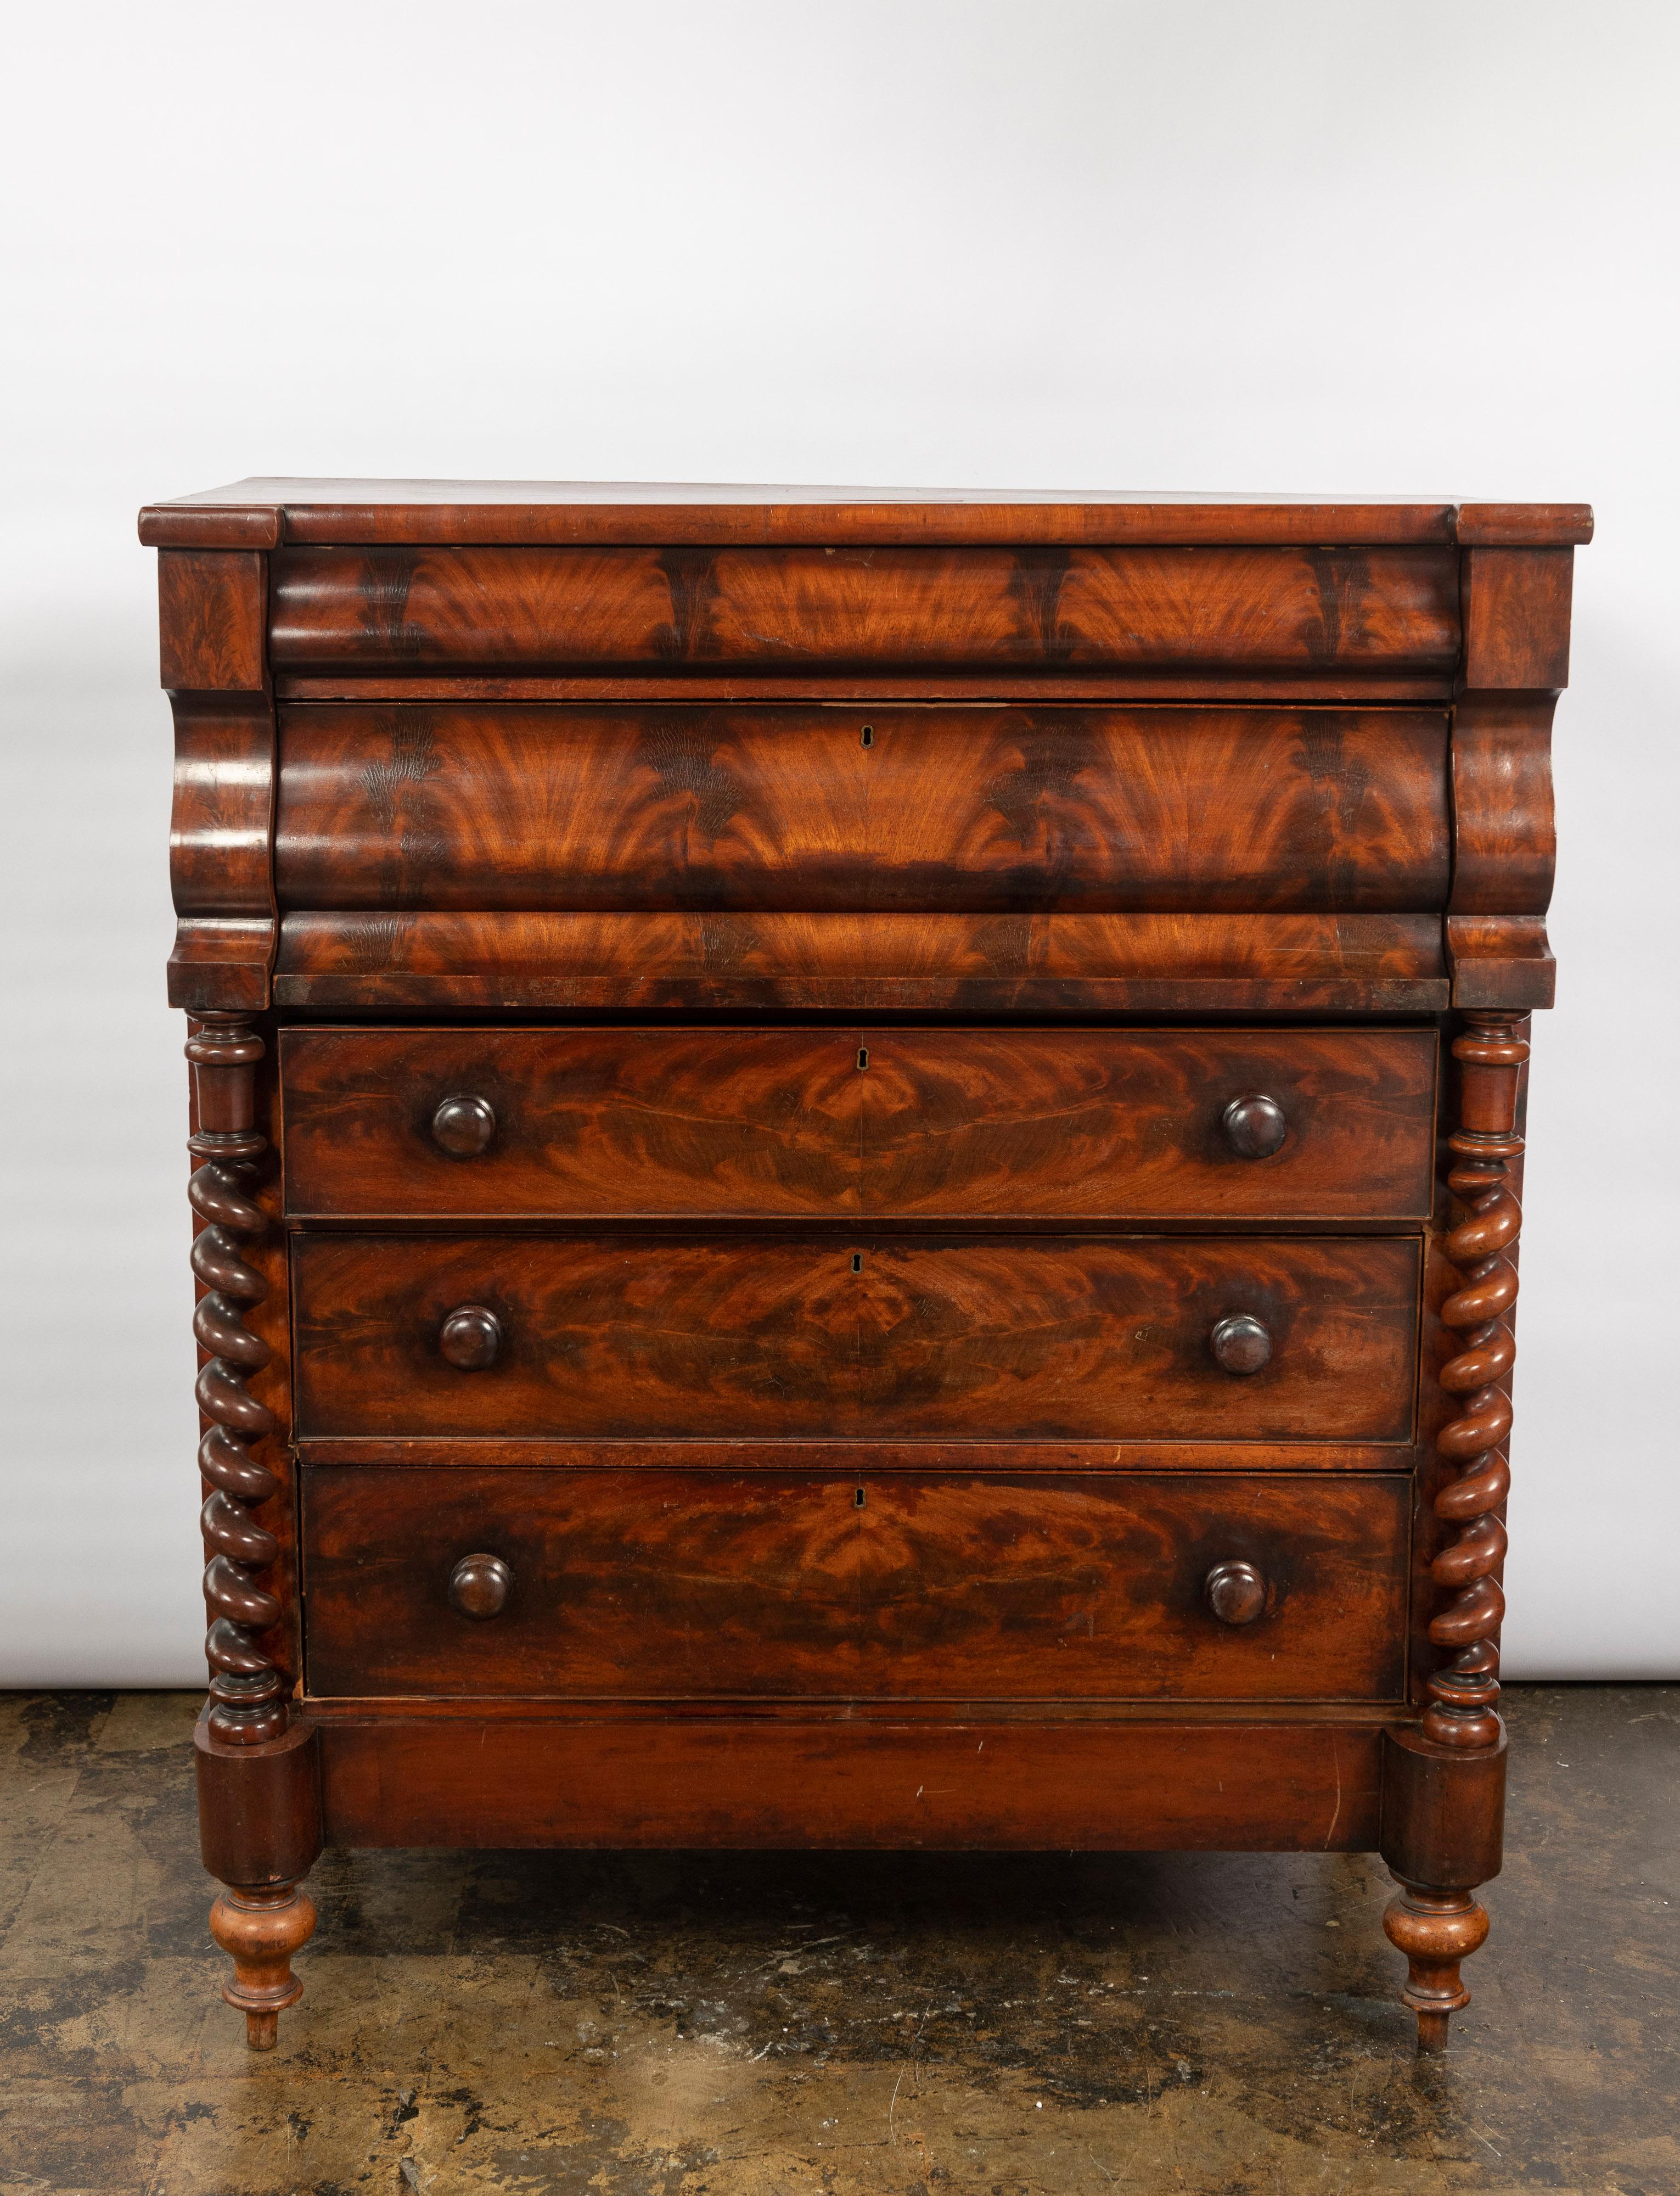 Classic tall Scottish ogee chest of drawers in good, untouched condition made of beautiful flame mahogany veneers. The five large drawers have oak sides and dovetail joints with original wooden knobs. The hand carved scrolled columns are quite